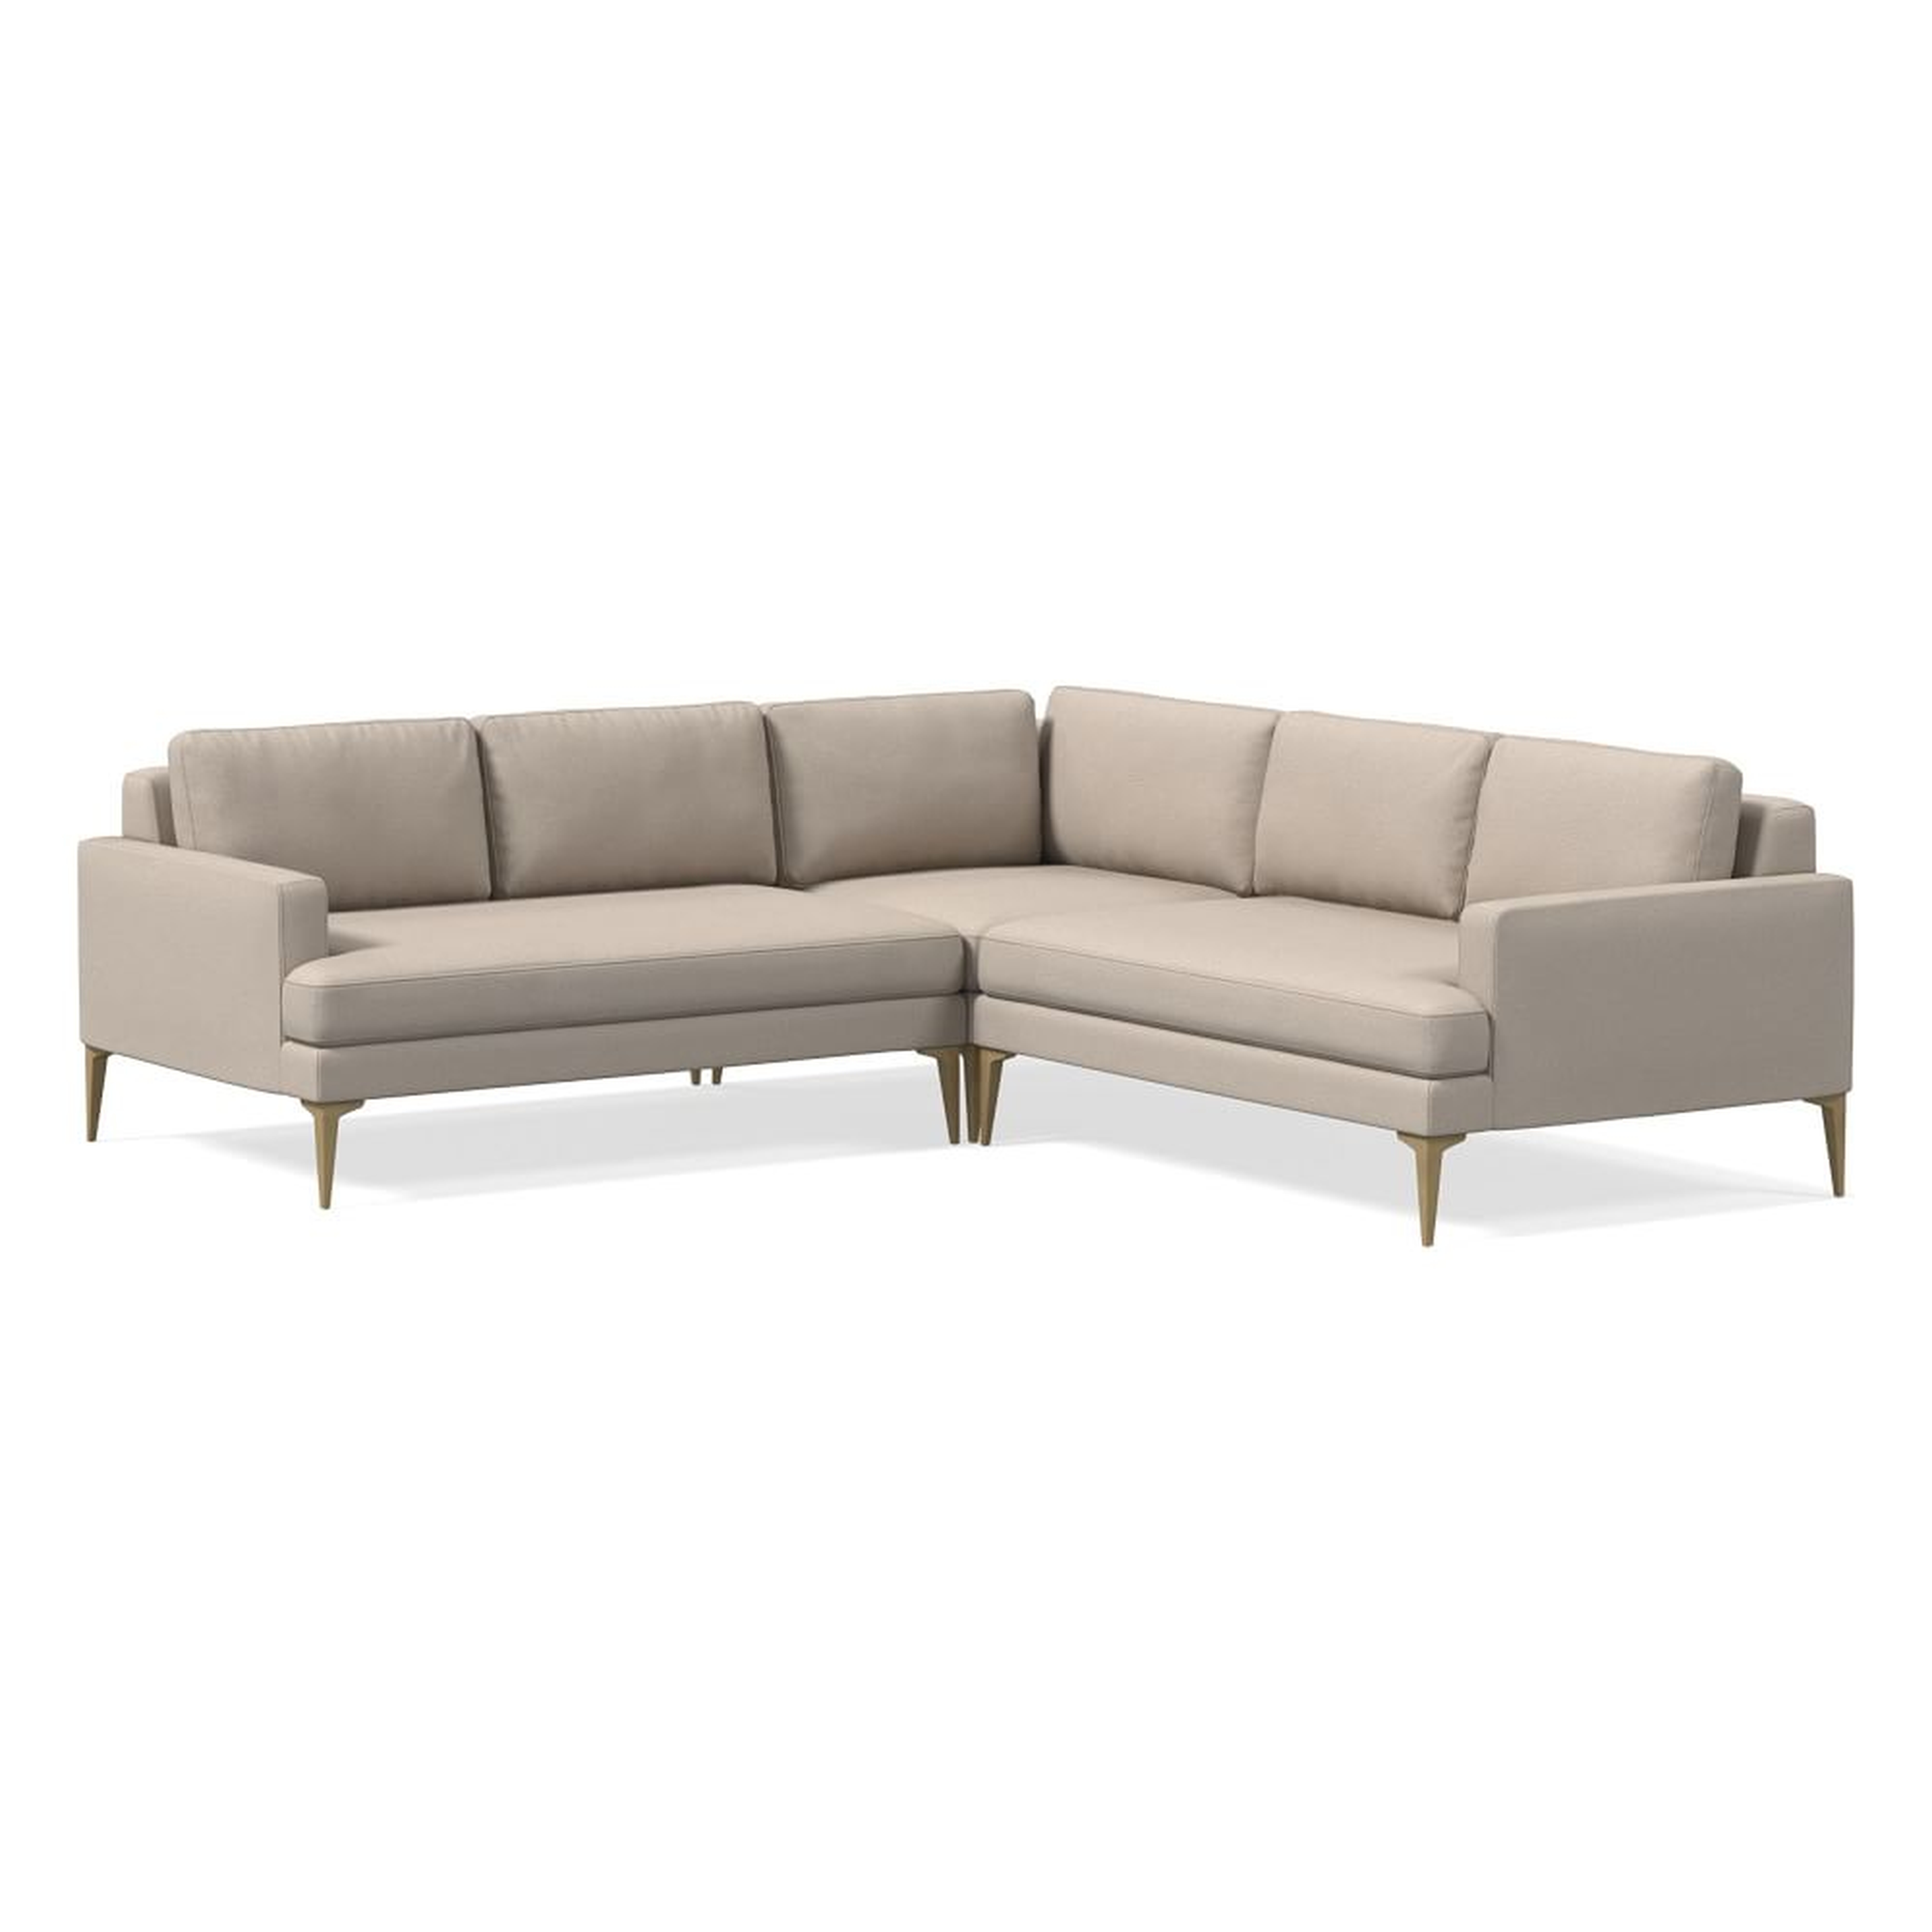 Andes 94" Multi Seat 3-Piece L-Shaped Sectional, Standard Depth, Yarn Dyed Linen Weave, Sand, BB - West Elm